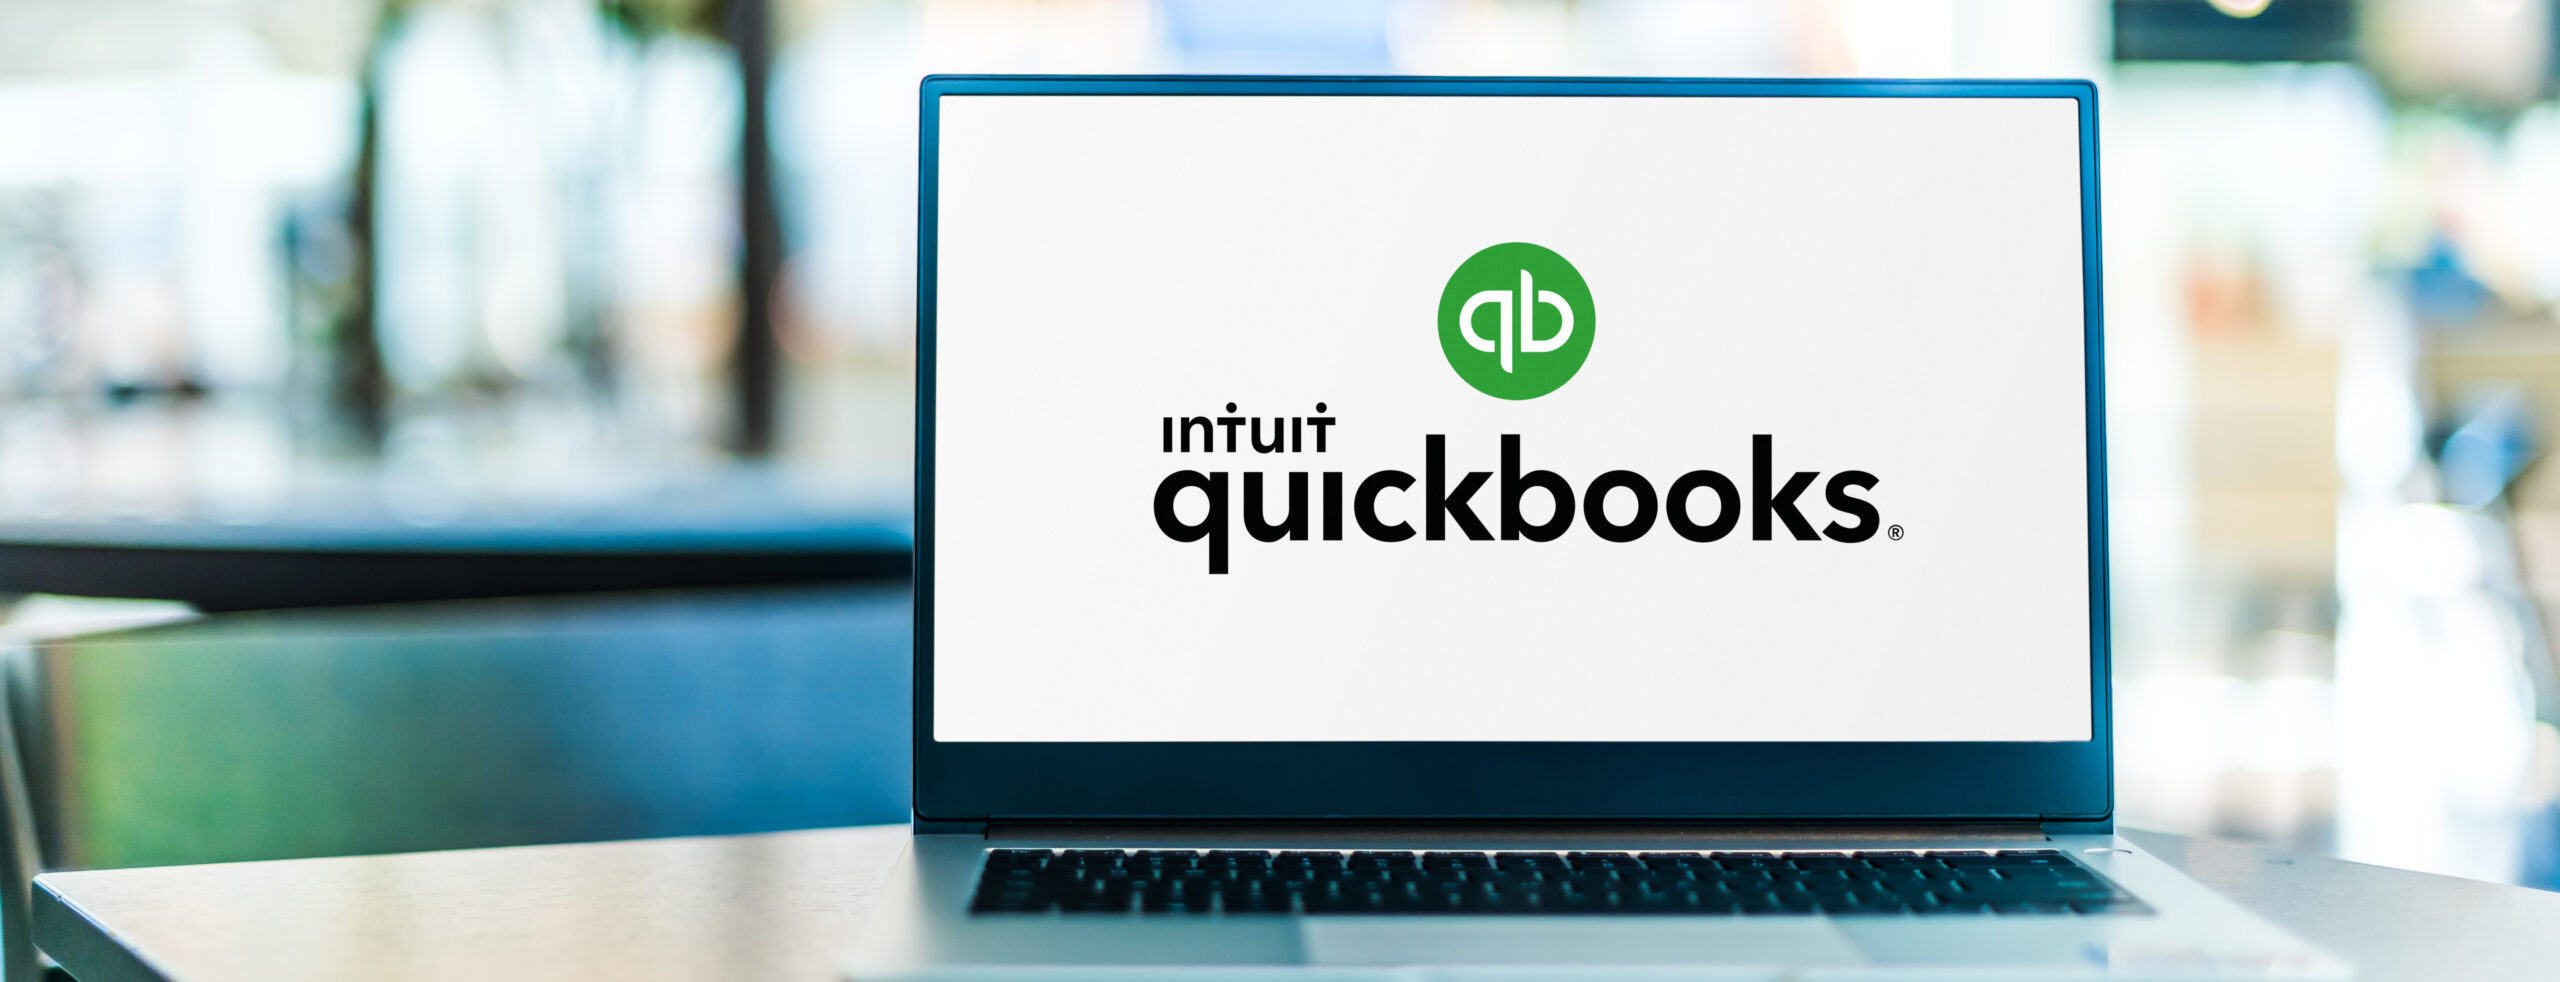 Laptop Sitting On Table With The Screen Open. The QuickBooks Logo Is On The Display. - Why Payroll Should Not Be Run In QuickBooks